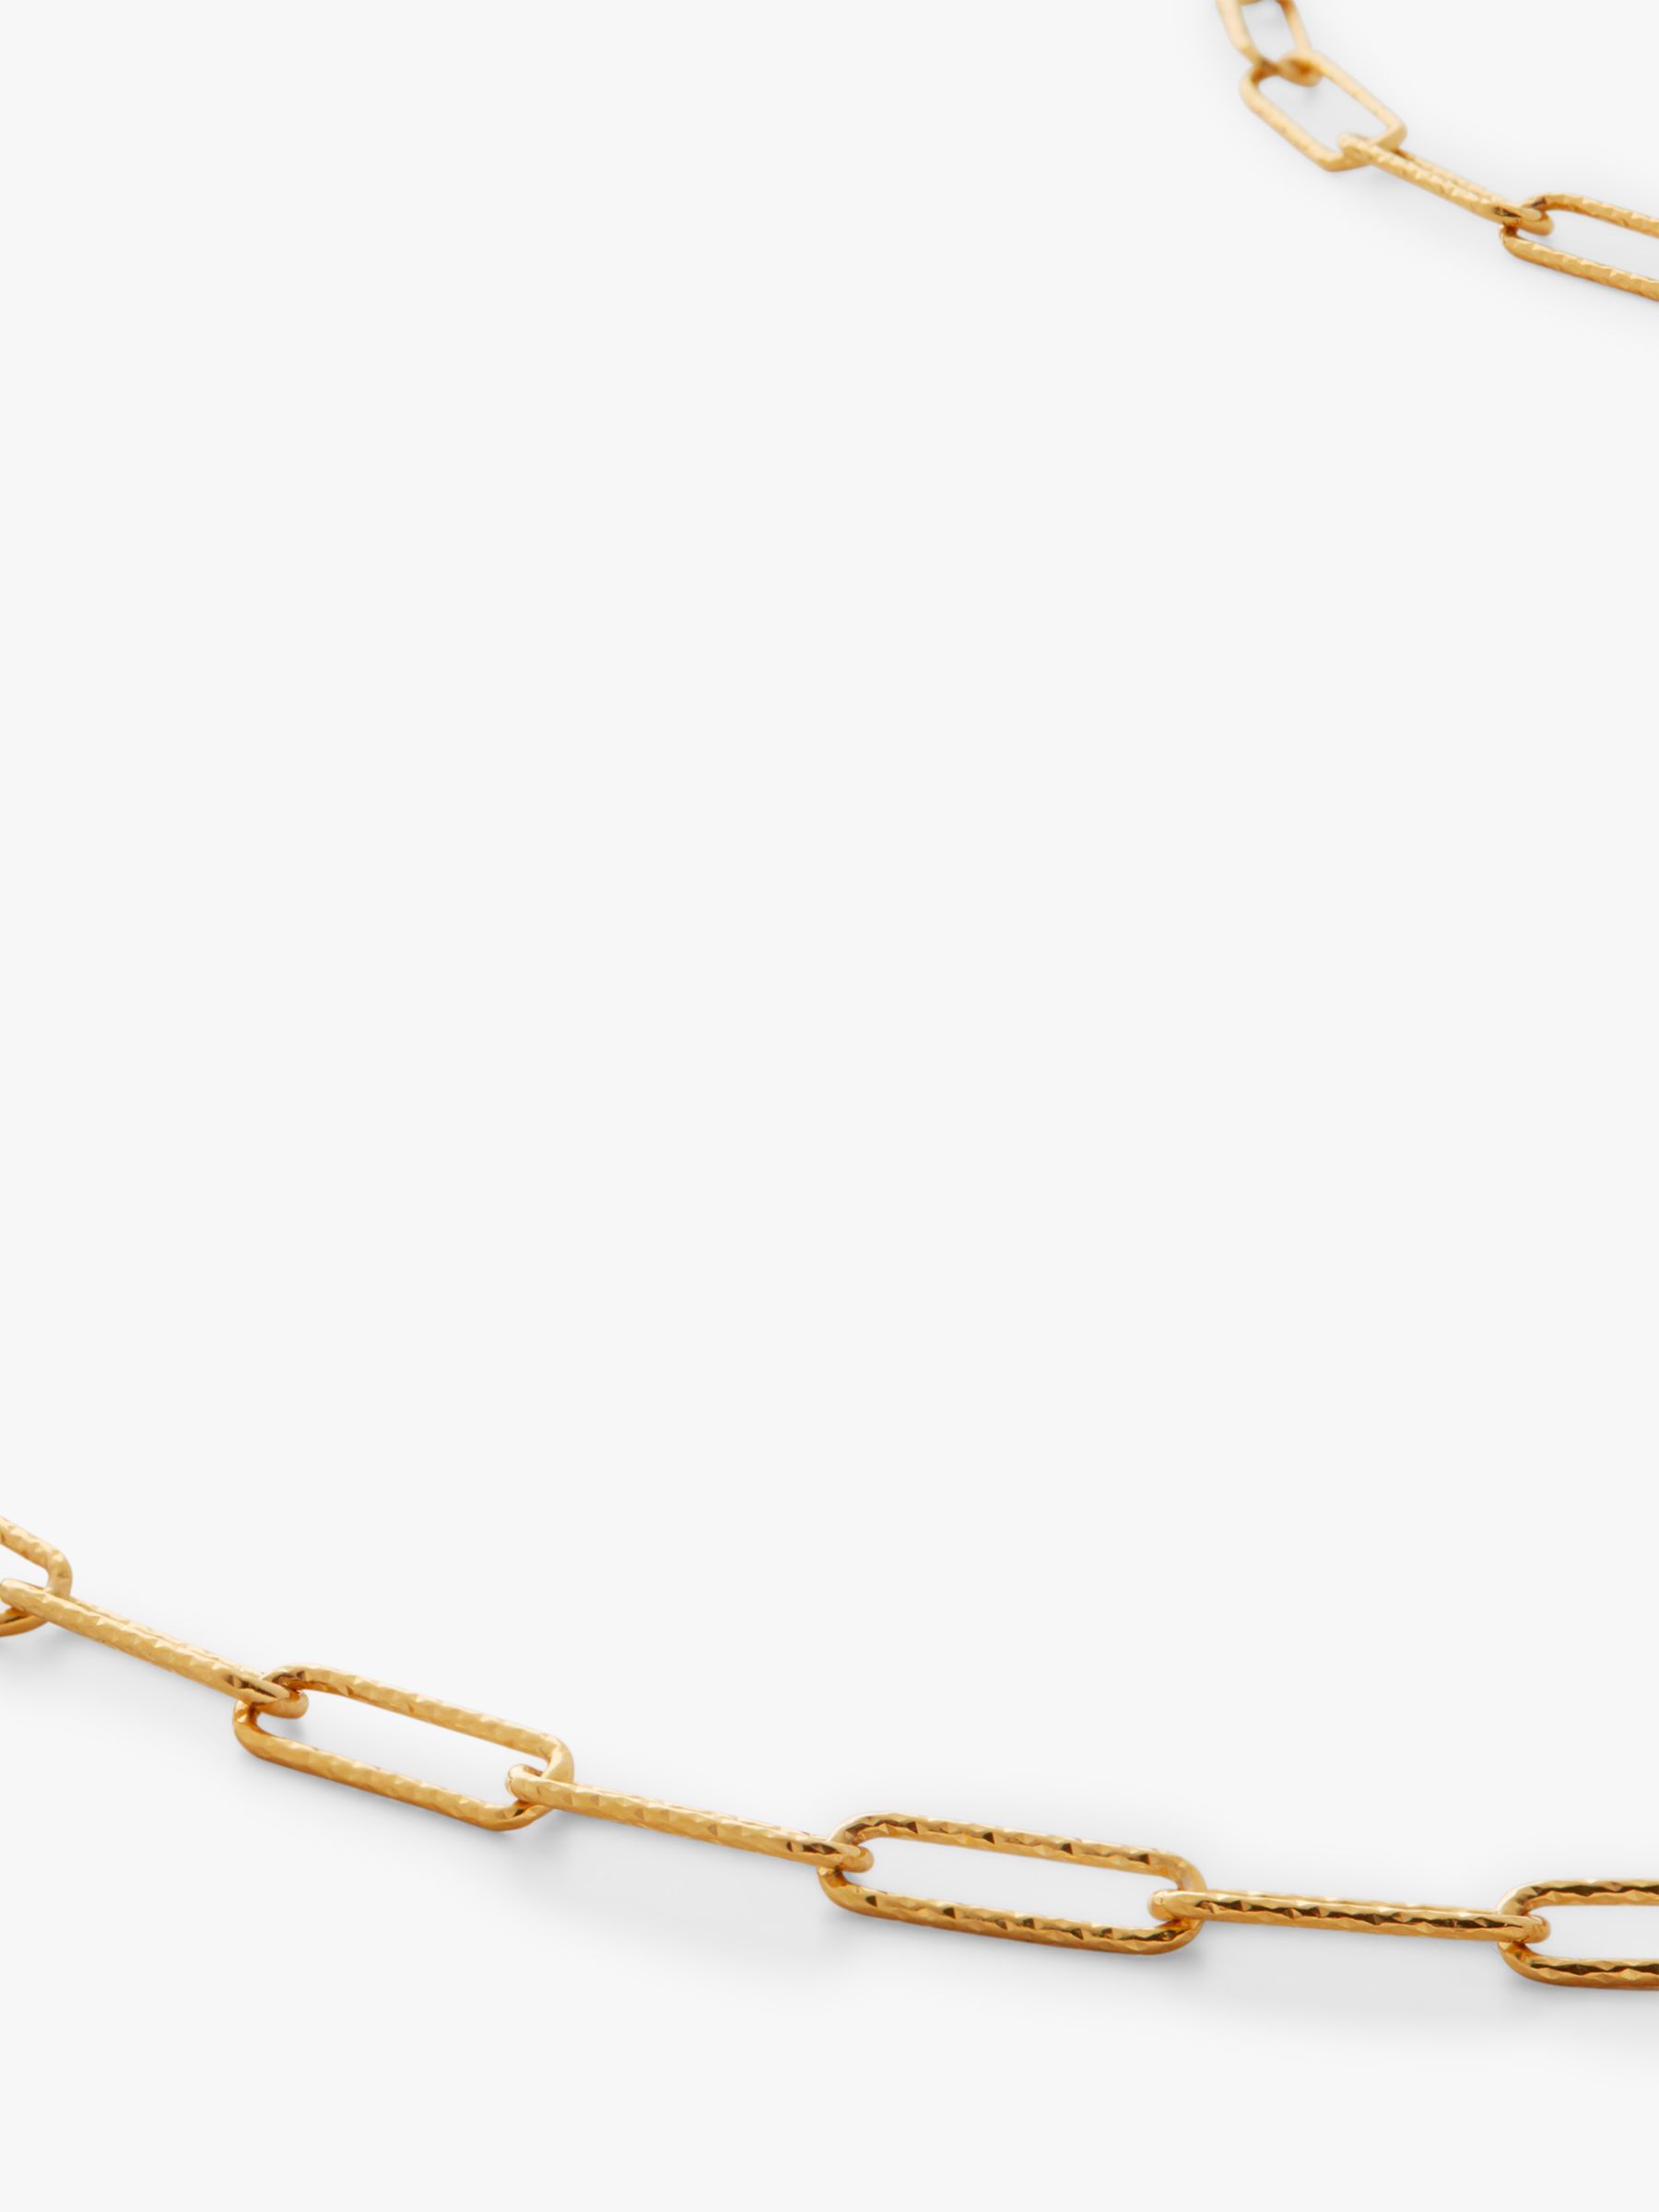 Monica Vinader Alta Textured Long Chain Necklace, Gold